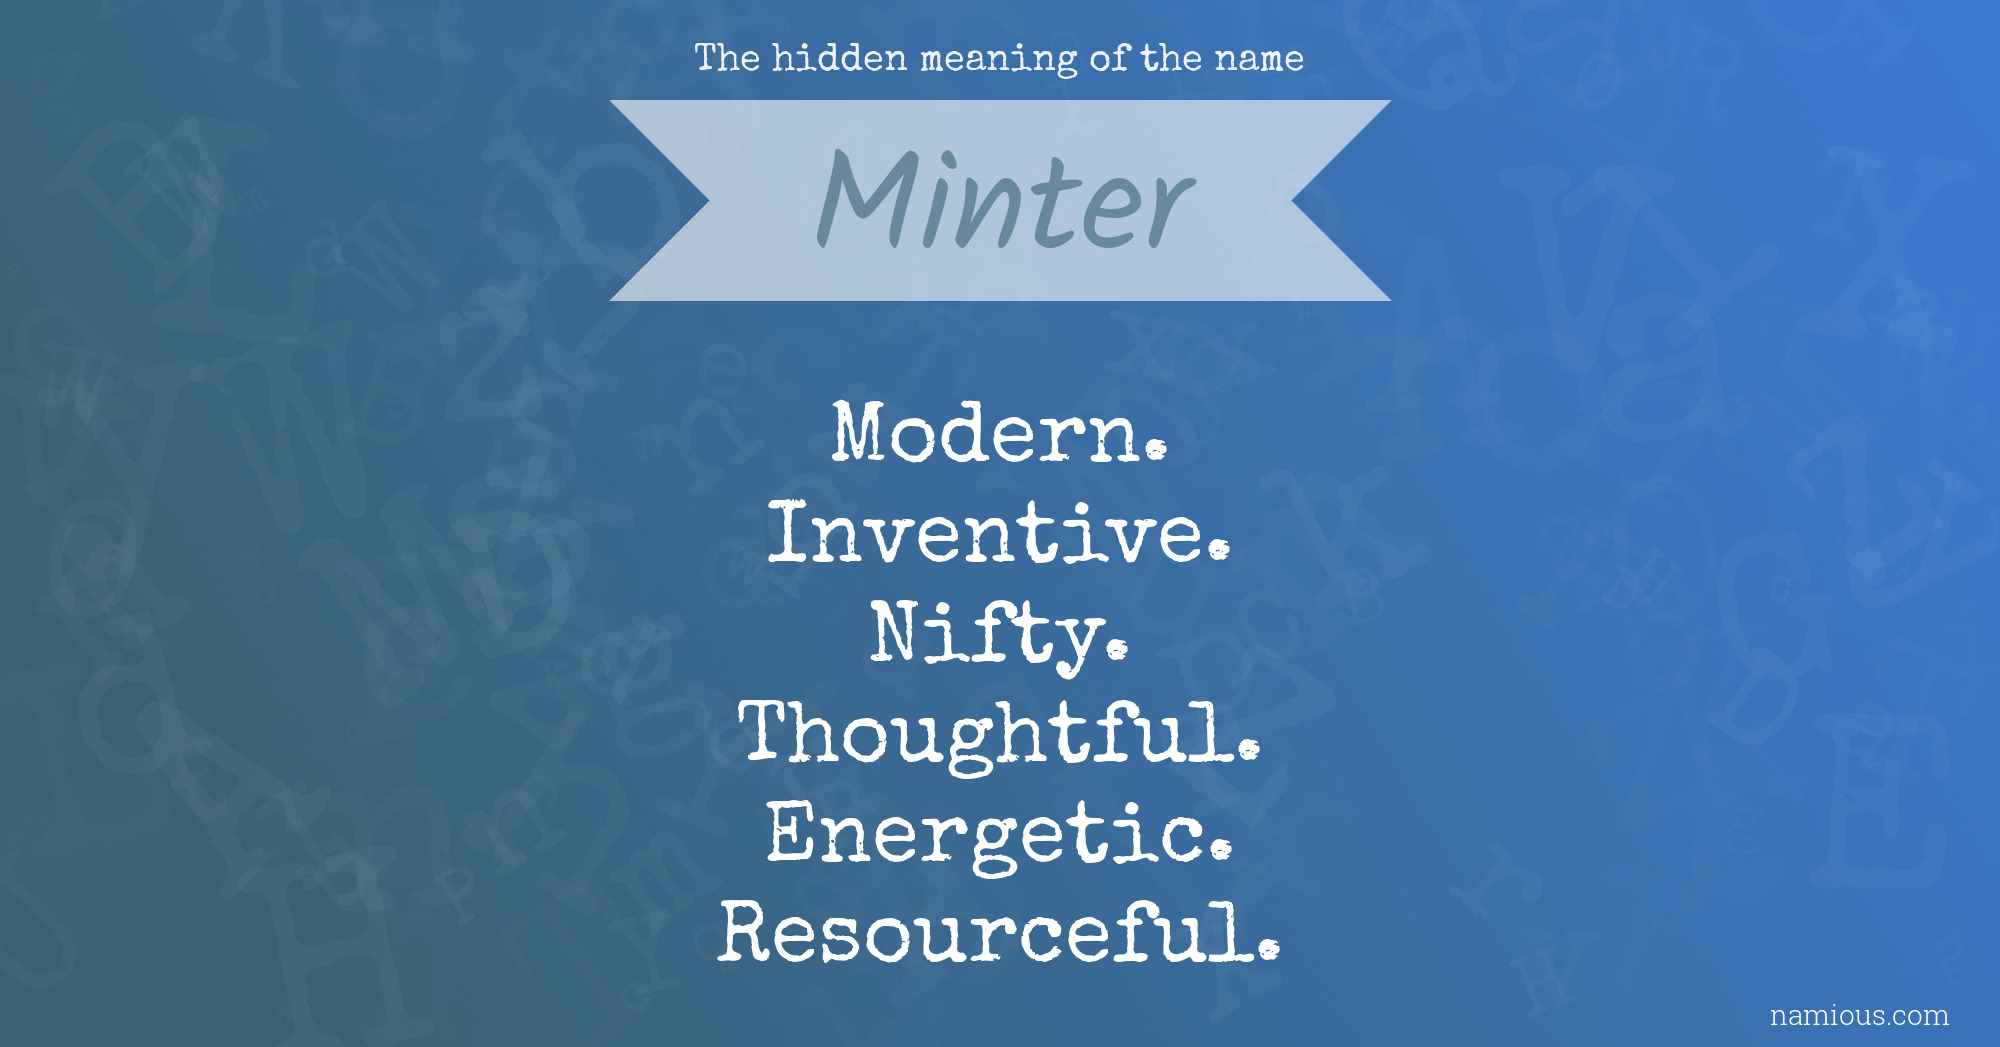 The hidden meaning of the name Minter